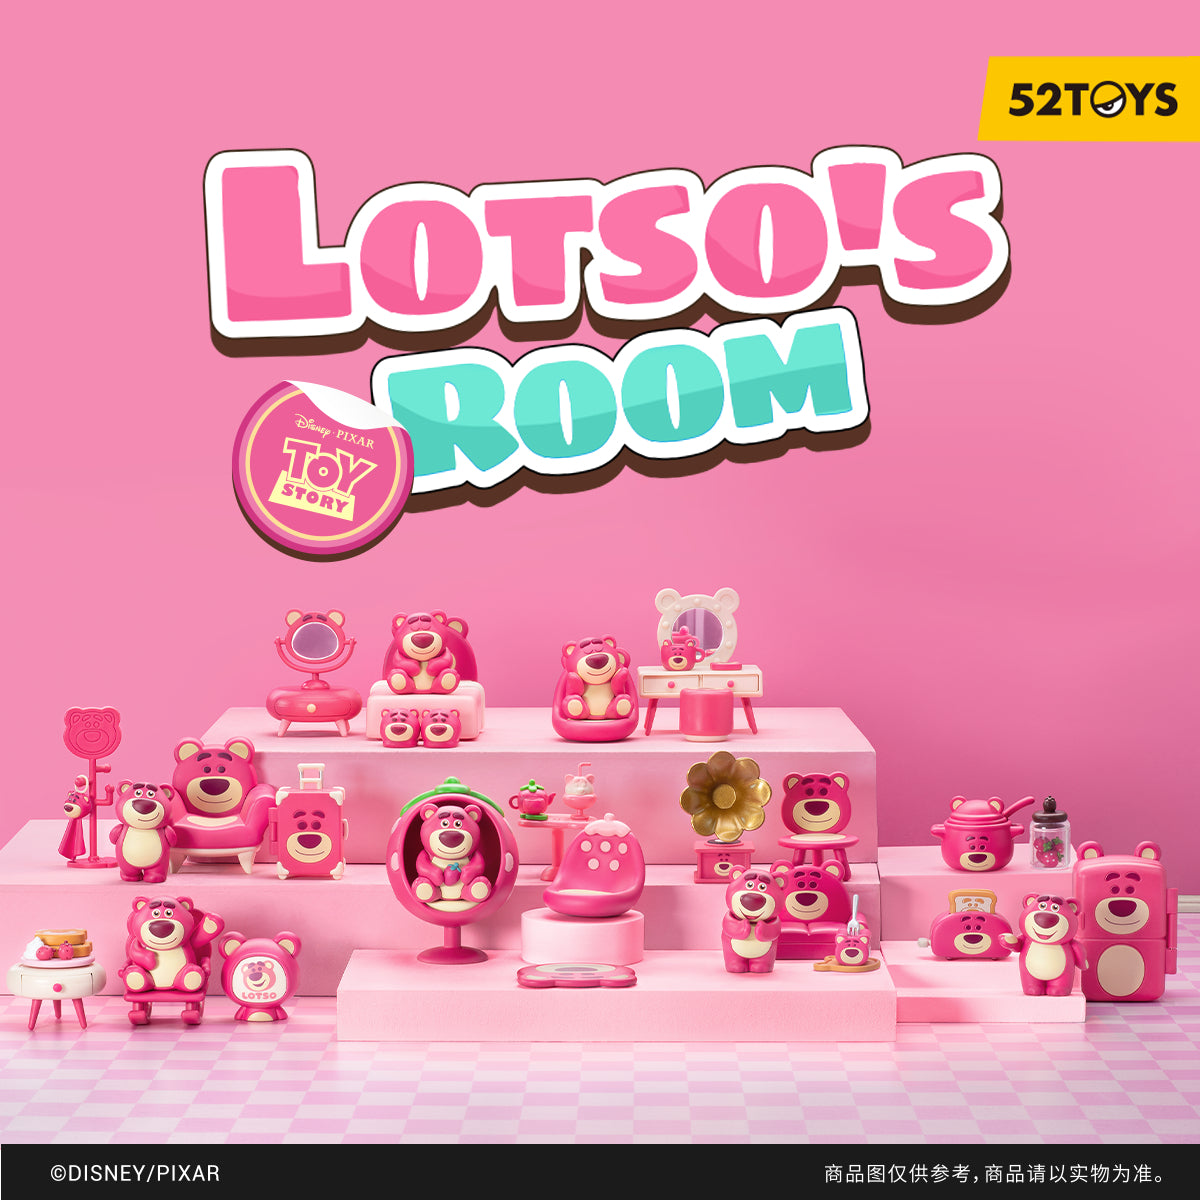 [52TOYS] TOYSTORY - LOTSO's Room series blind box